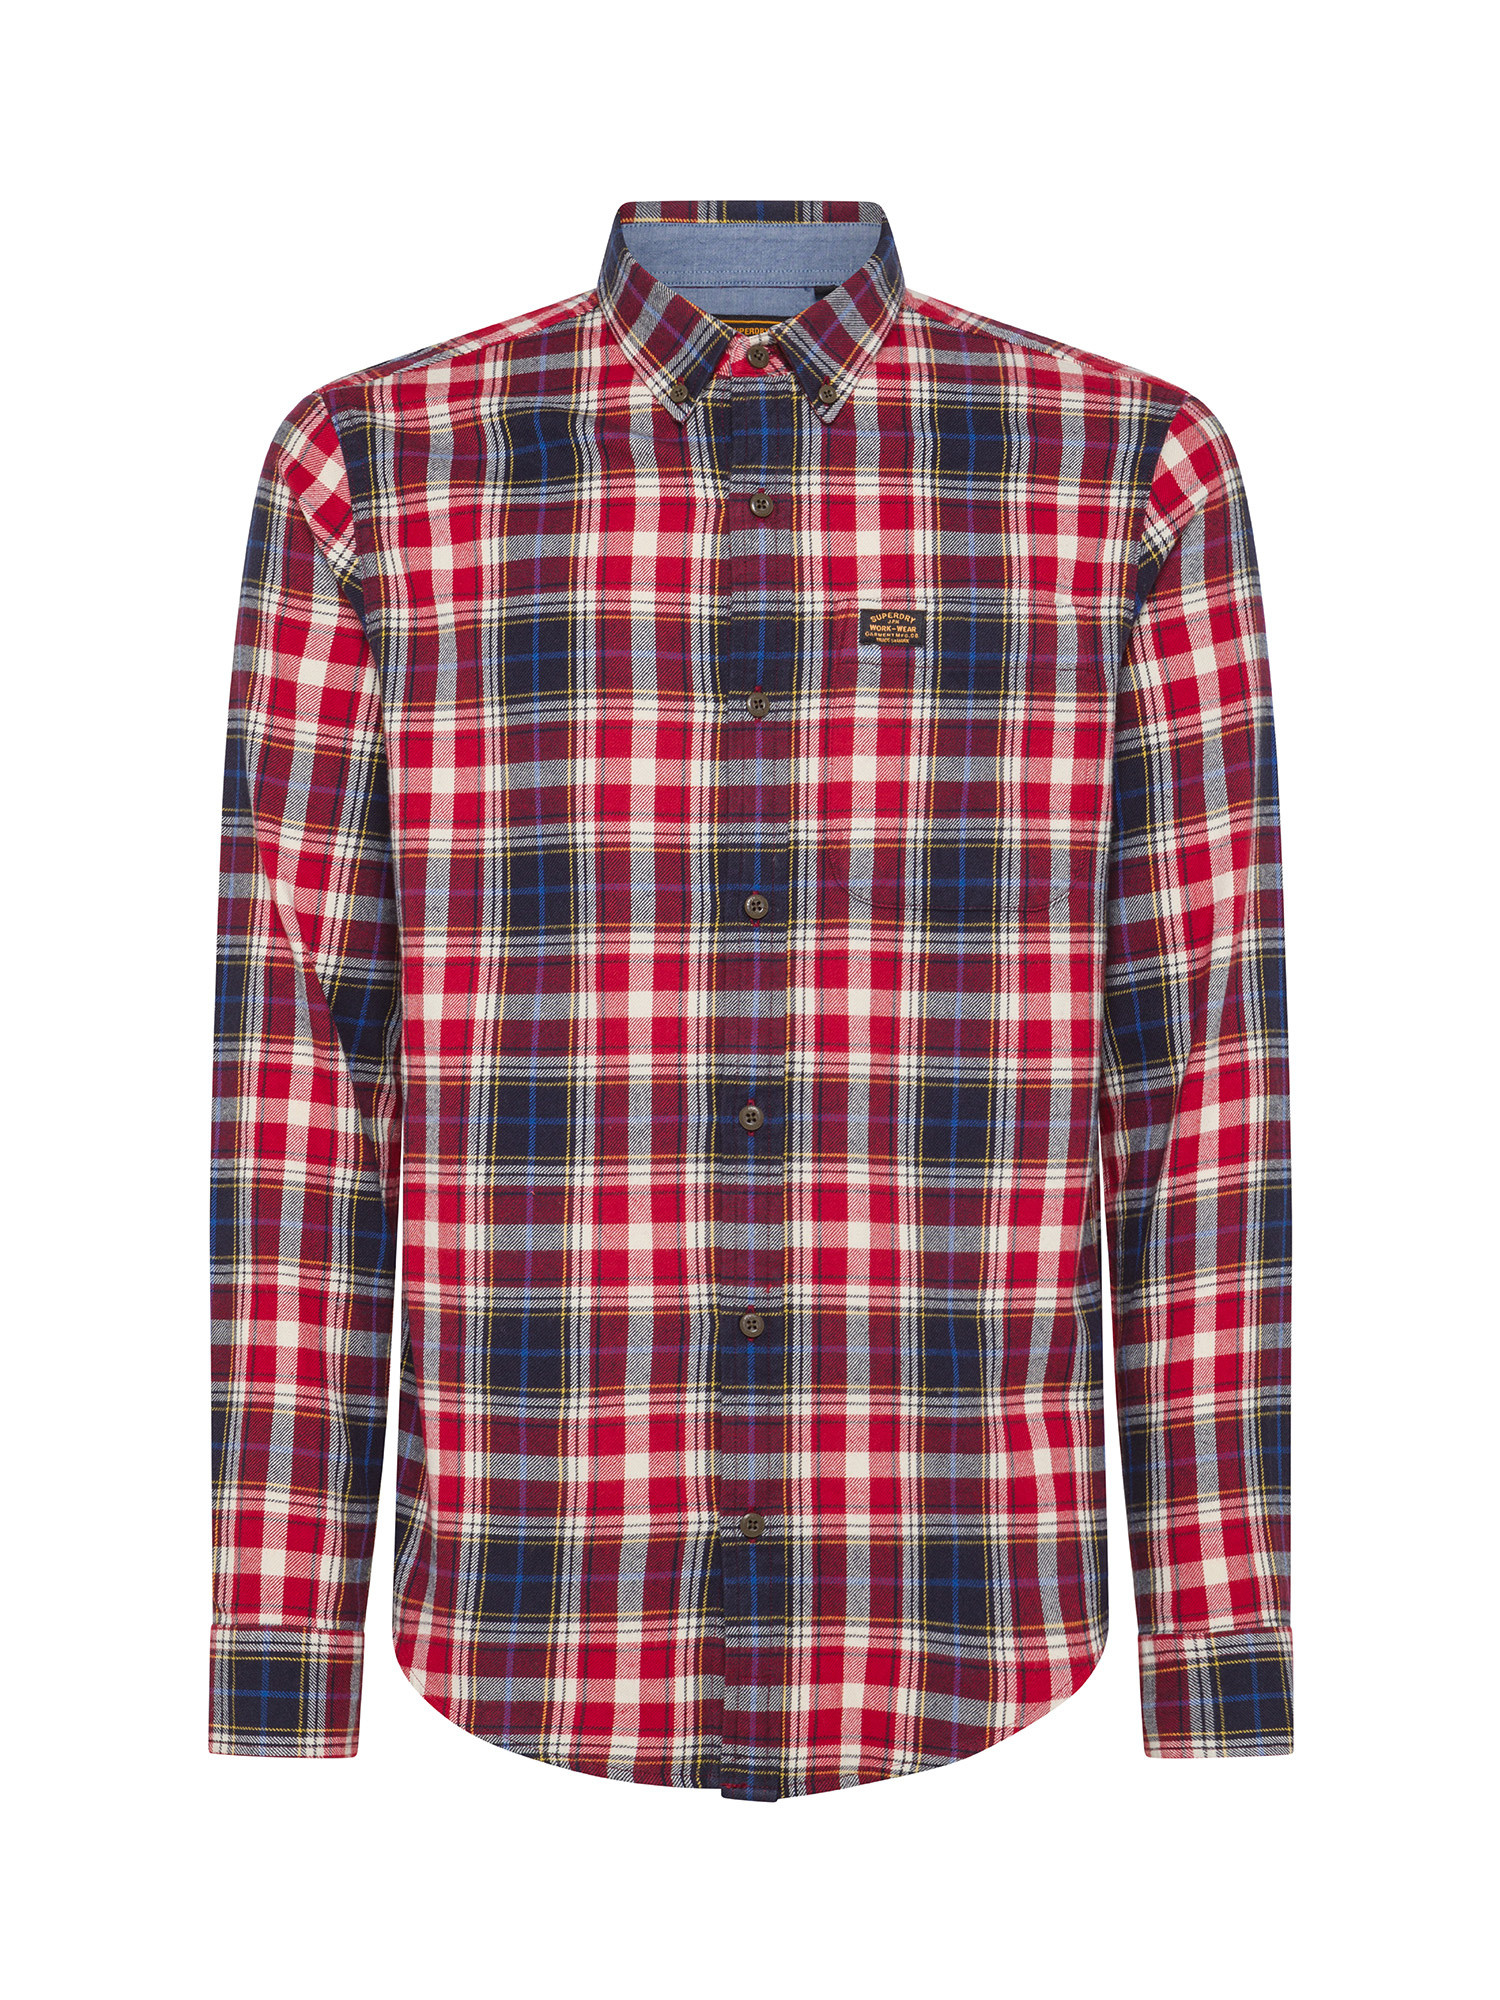 Superdry - Cotton checked shirt, Red, large image number 0